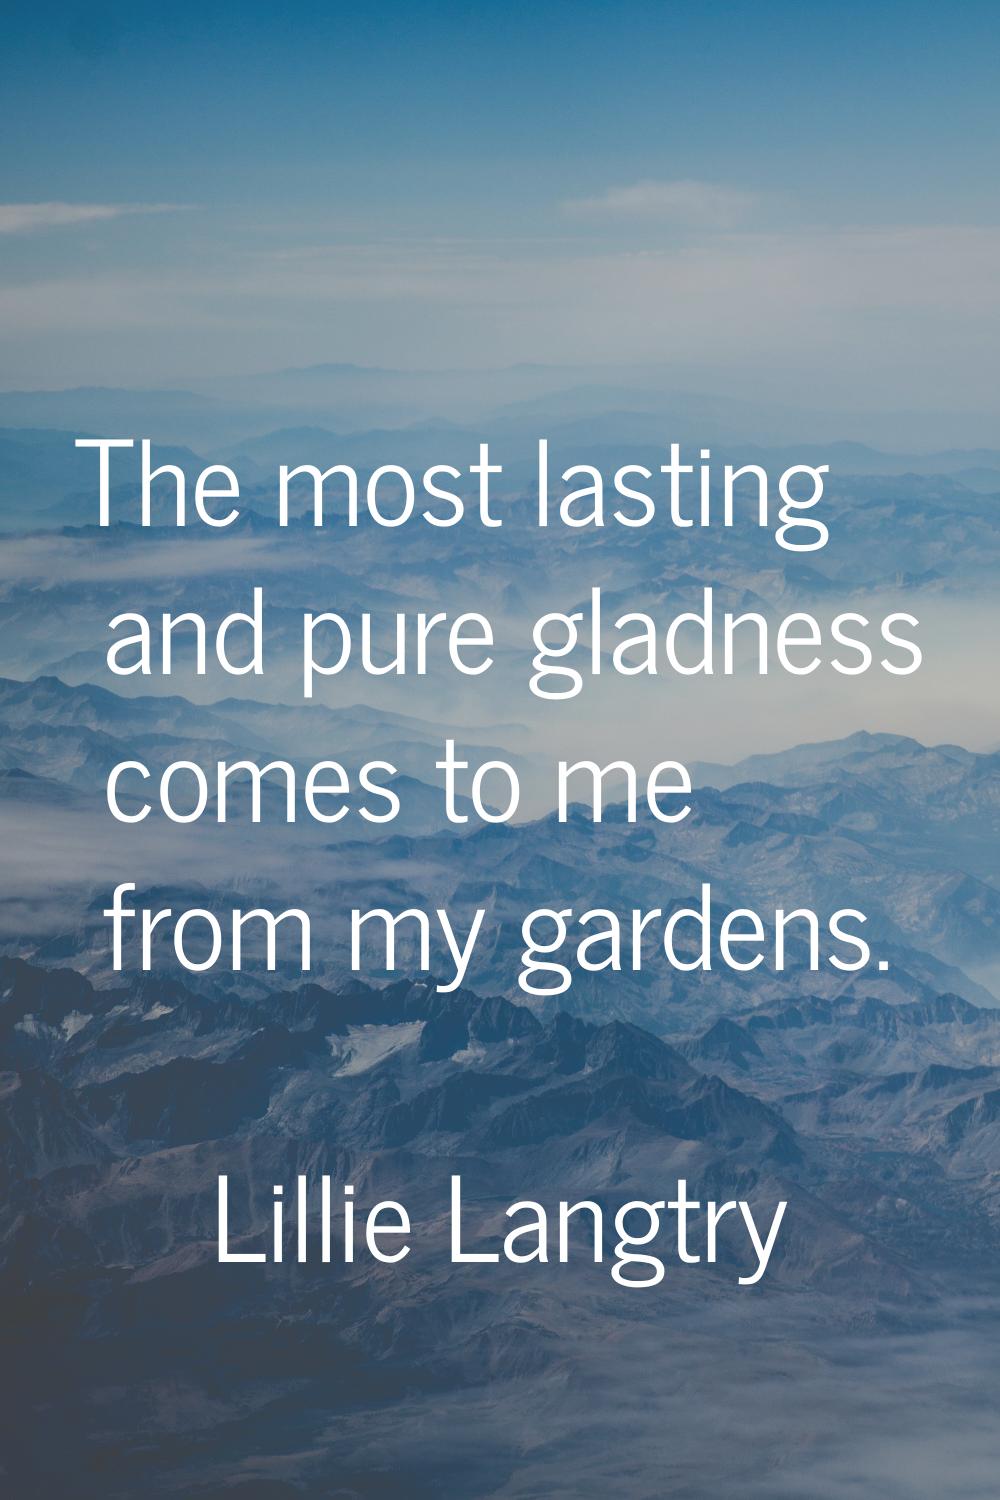 The most lasting and pure gladness comes to me from my gardens.